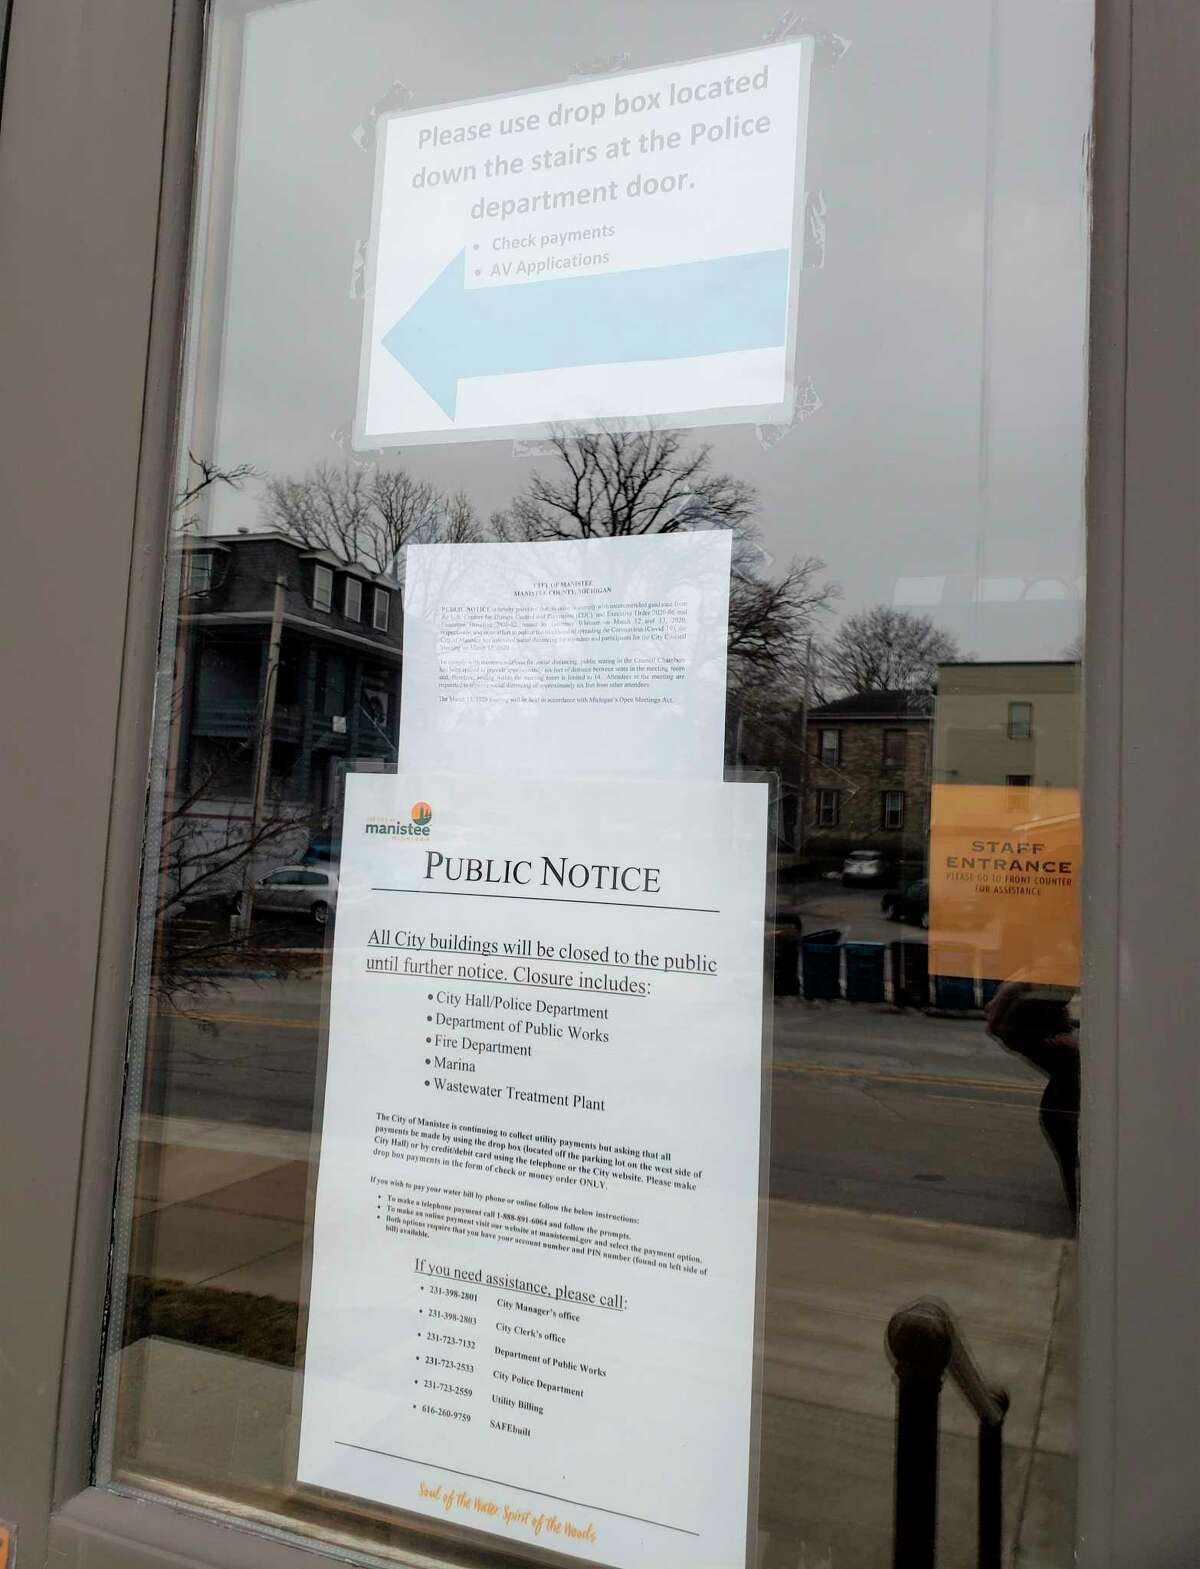 Manistee City Hall's public entrance has notices taped to the window alerting visitors that the city has ceased face-to-face interactions and visits for all city buildings in light of the efforts to curb the coronavirus pandemic. (Arielle Breen/News Advocate)